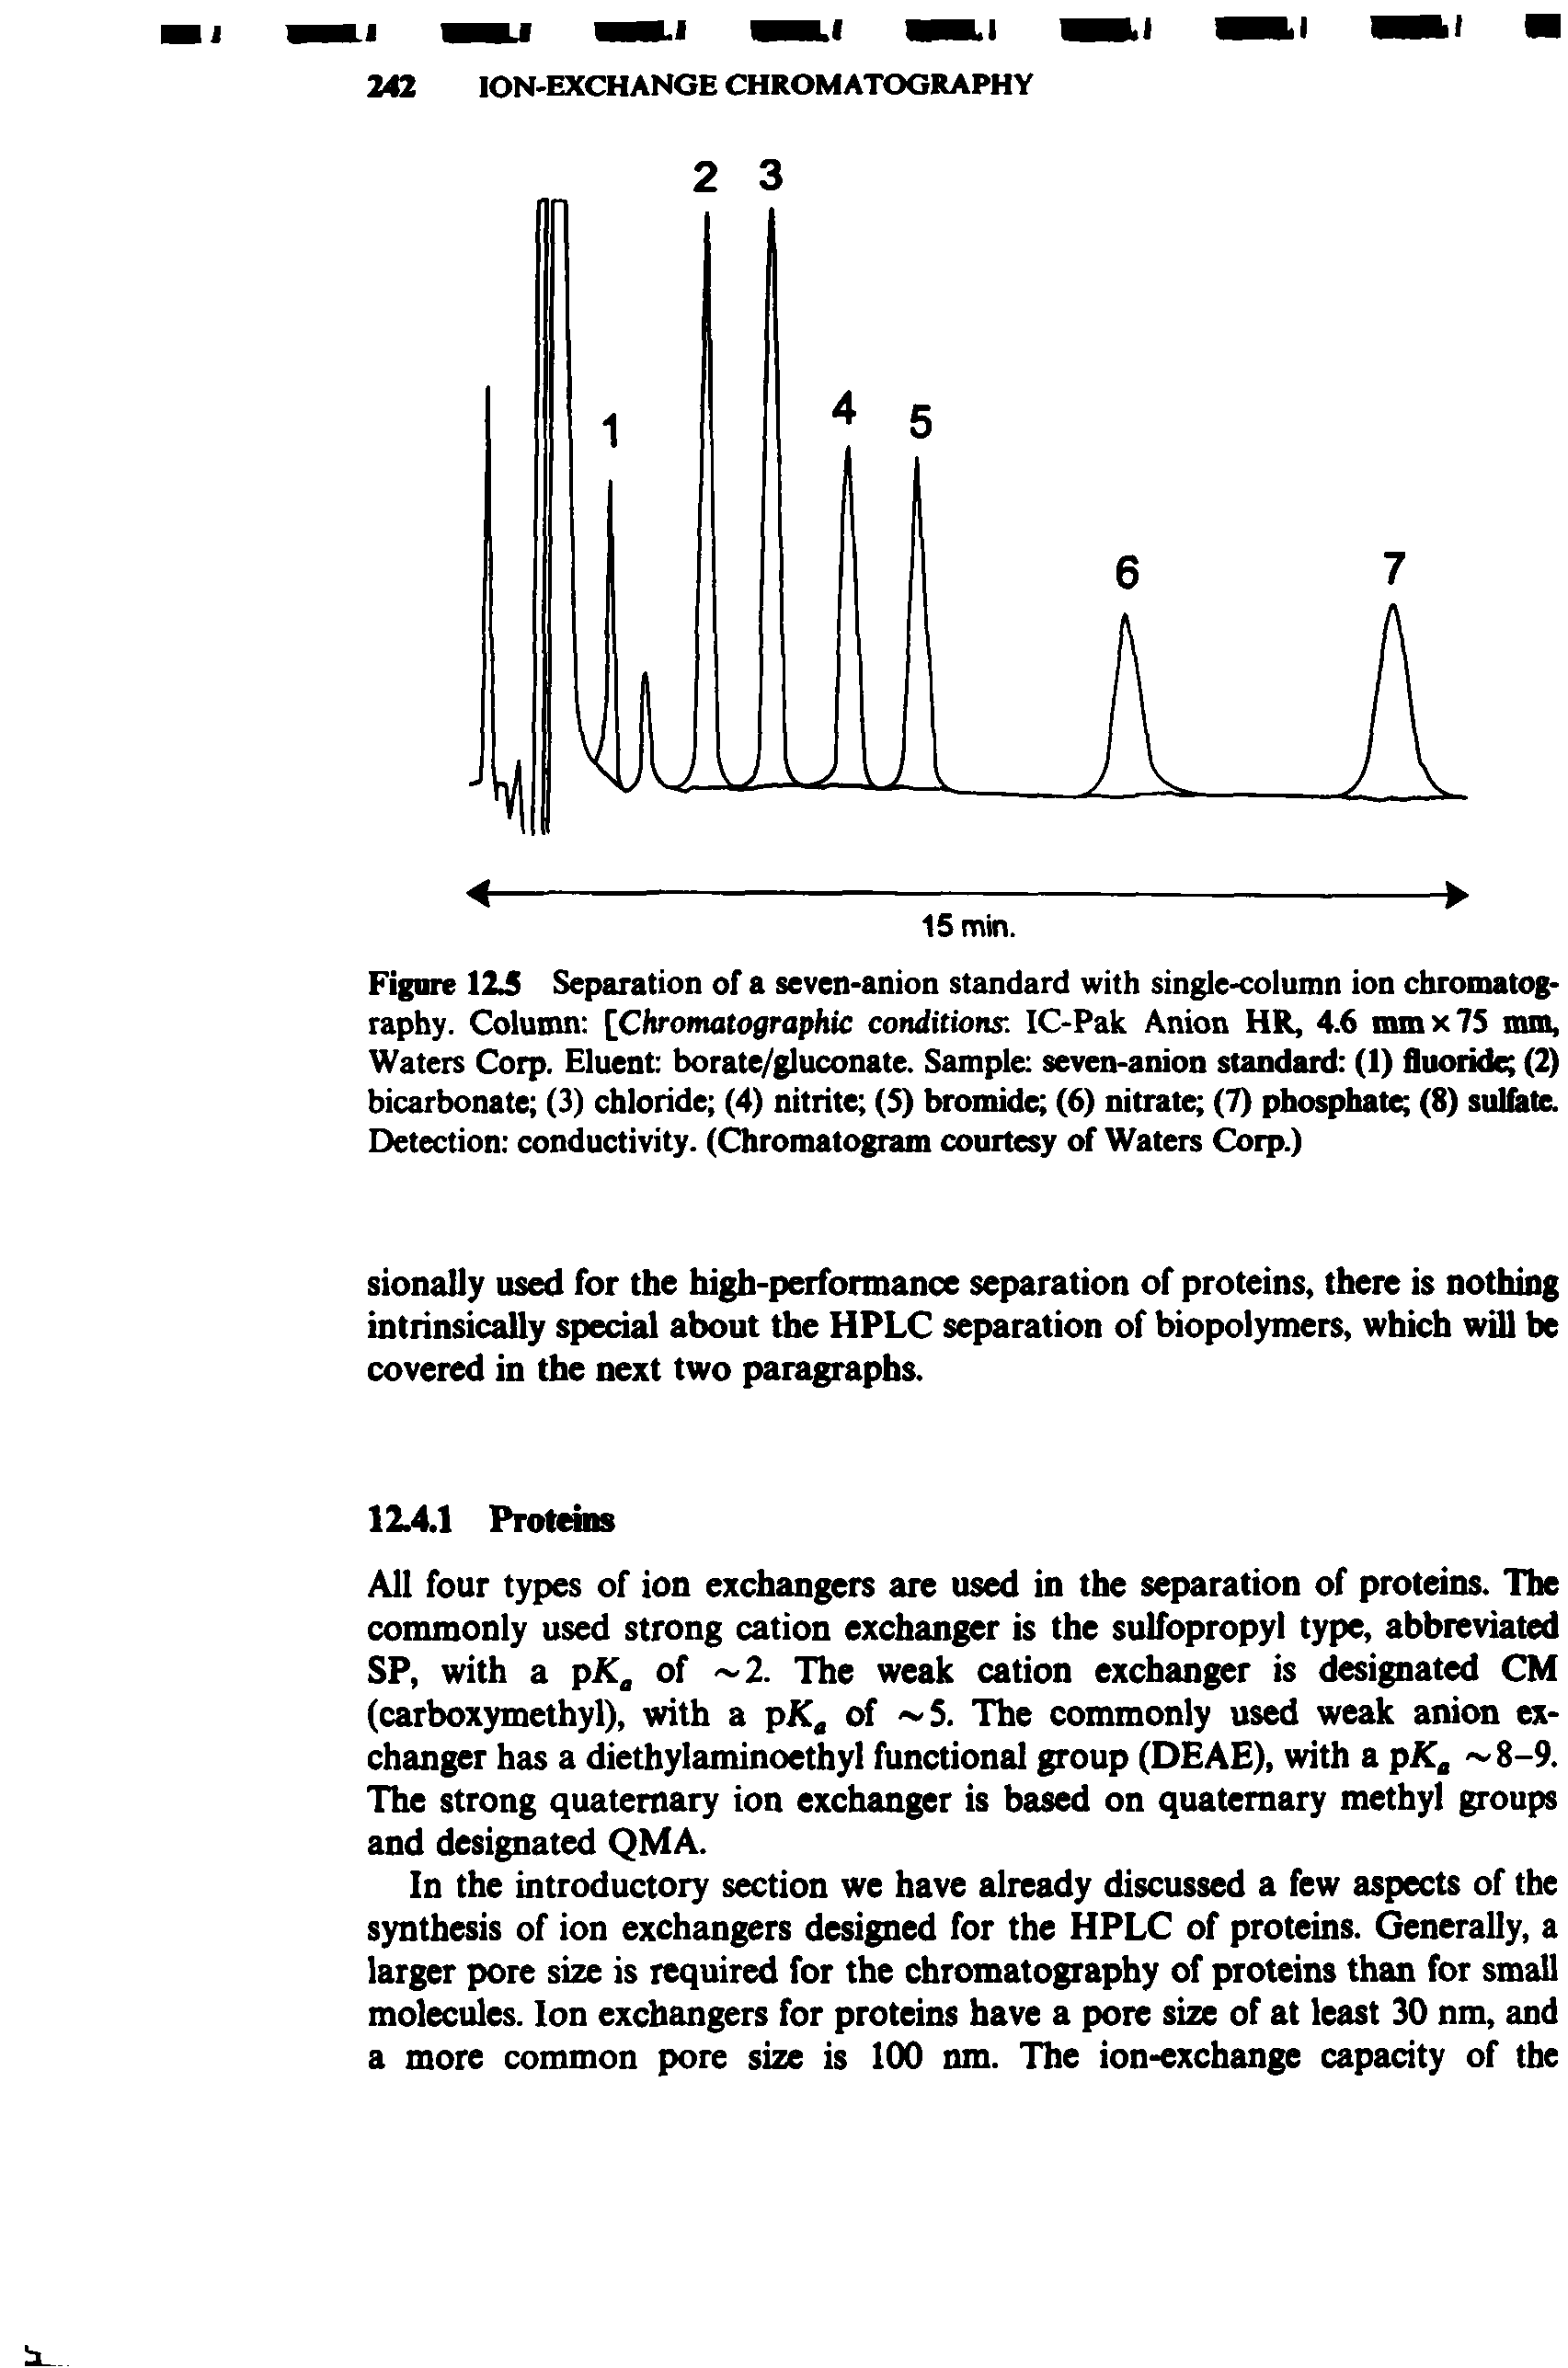 Figure 12.5 Separation of a seven-anion standard with single-column ion chromatography. Column [Chromatographic conditions IC-Pak Anion HR, 4.6 mmx7S mm. Waters Corp. Eluent borate/gluconate. Sample seven-anion standard (1) fluoride (2) bicarbonate (3) chloride (4) nitrite (S) bromide (6) nitrate (7) phosplmt (8) suUite. Detection conductivity. (Qiromatogram courtesy of Waters Corp.)...